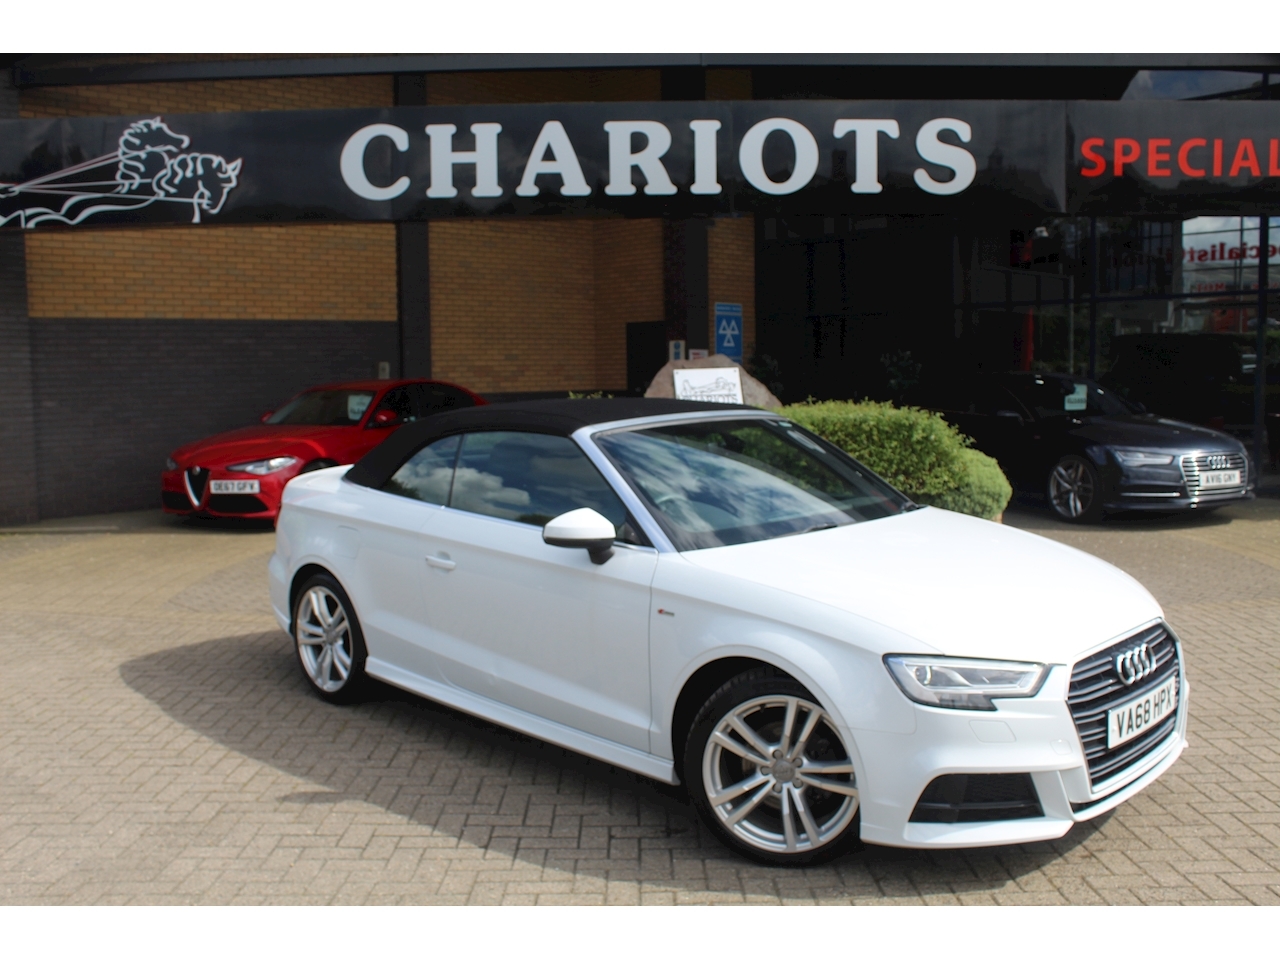 1.5 TFSI CoD 35 S line Cabriolet 2dr Petrol Manual (s/s) (150 ps)